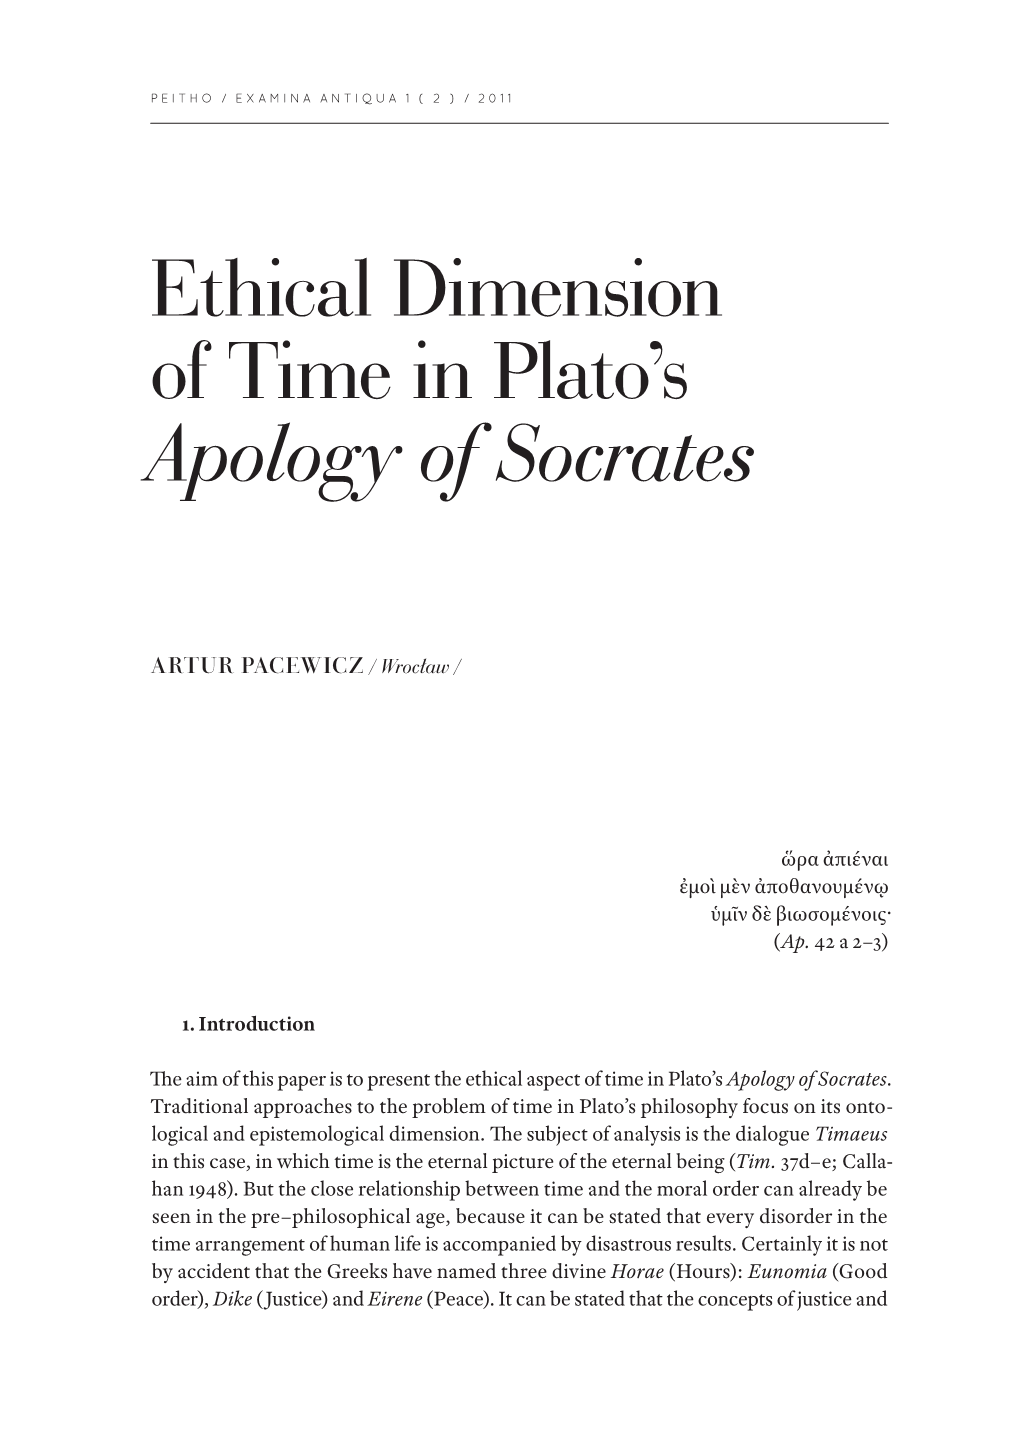 Ethical Dimension of Time in Plato's Apology of Socrates